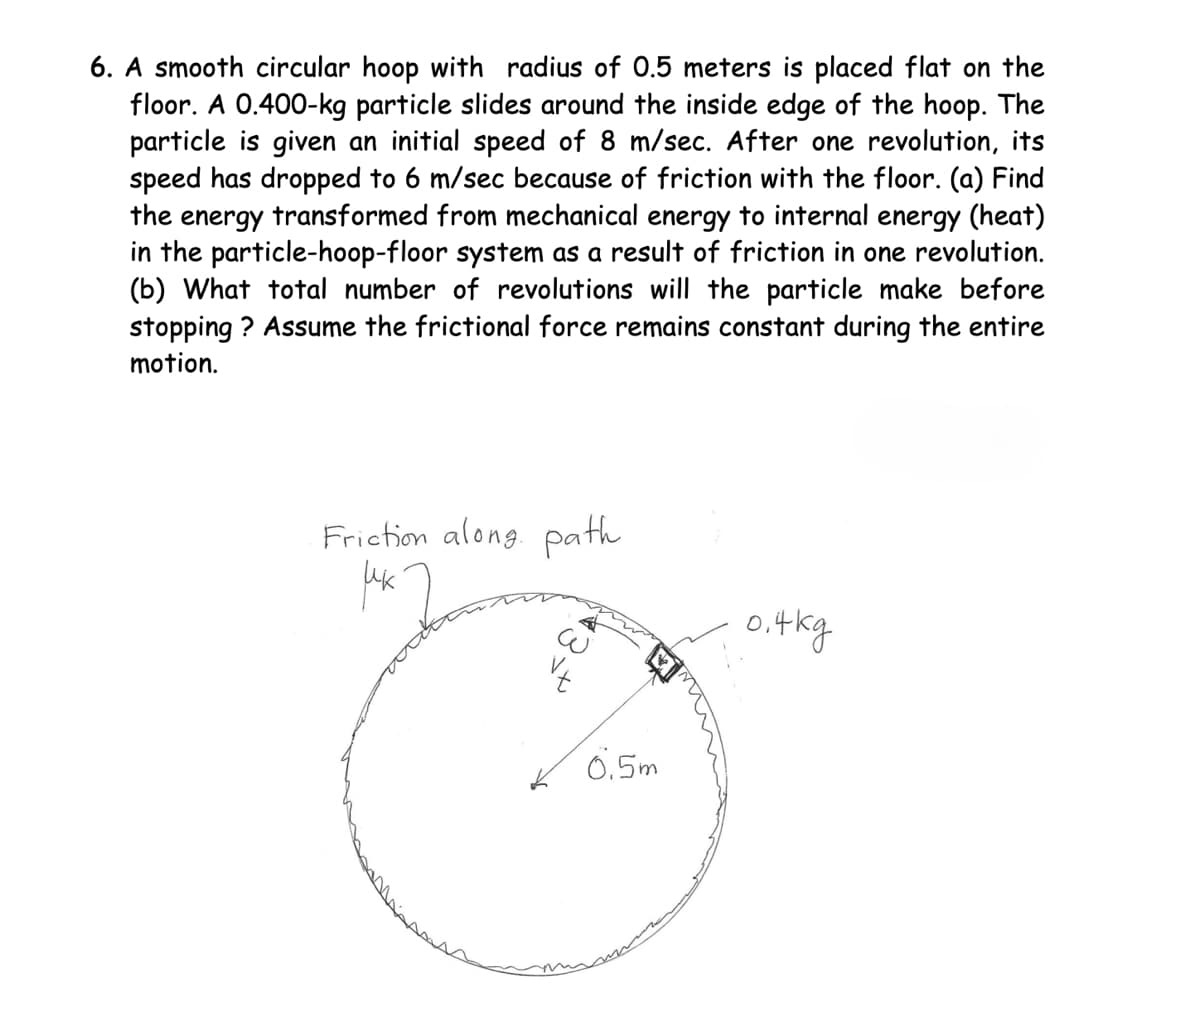 6. A smooth circular hoop with radius of 0.5 meters is placed flat on the
floor. A 0.400-kg particle slides around the inside edge of the hoop. The
particle is given an initial speed of 8 m/sec. After one revolution, its
speed has dropped to 6 m/sec because of friction with the floor. (a) Find
the energy transformed from mechanical energy to internal energy (heat)
in the particle-hoop-floor system as a result of friction in one revolution.
(b) What total number of revolutions will the particle make before
stopping? Assume the frictional force remains constant during the entire
motion.
Friction along path
рек
0.5m
0.4kg